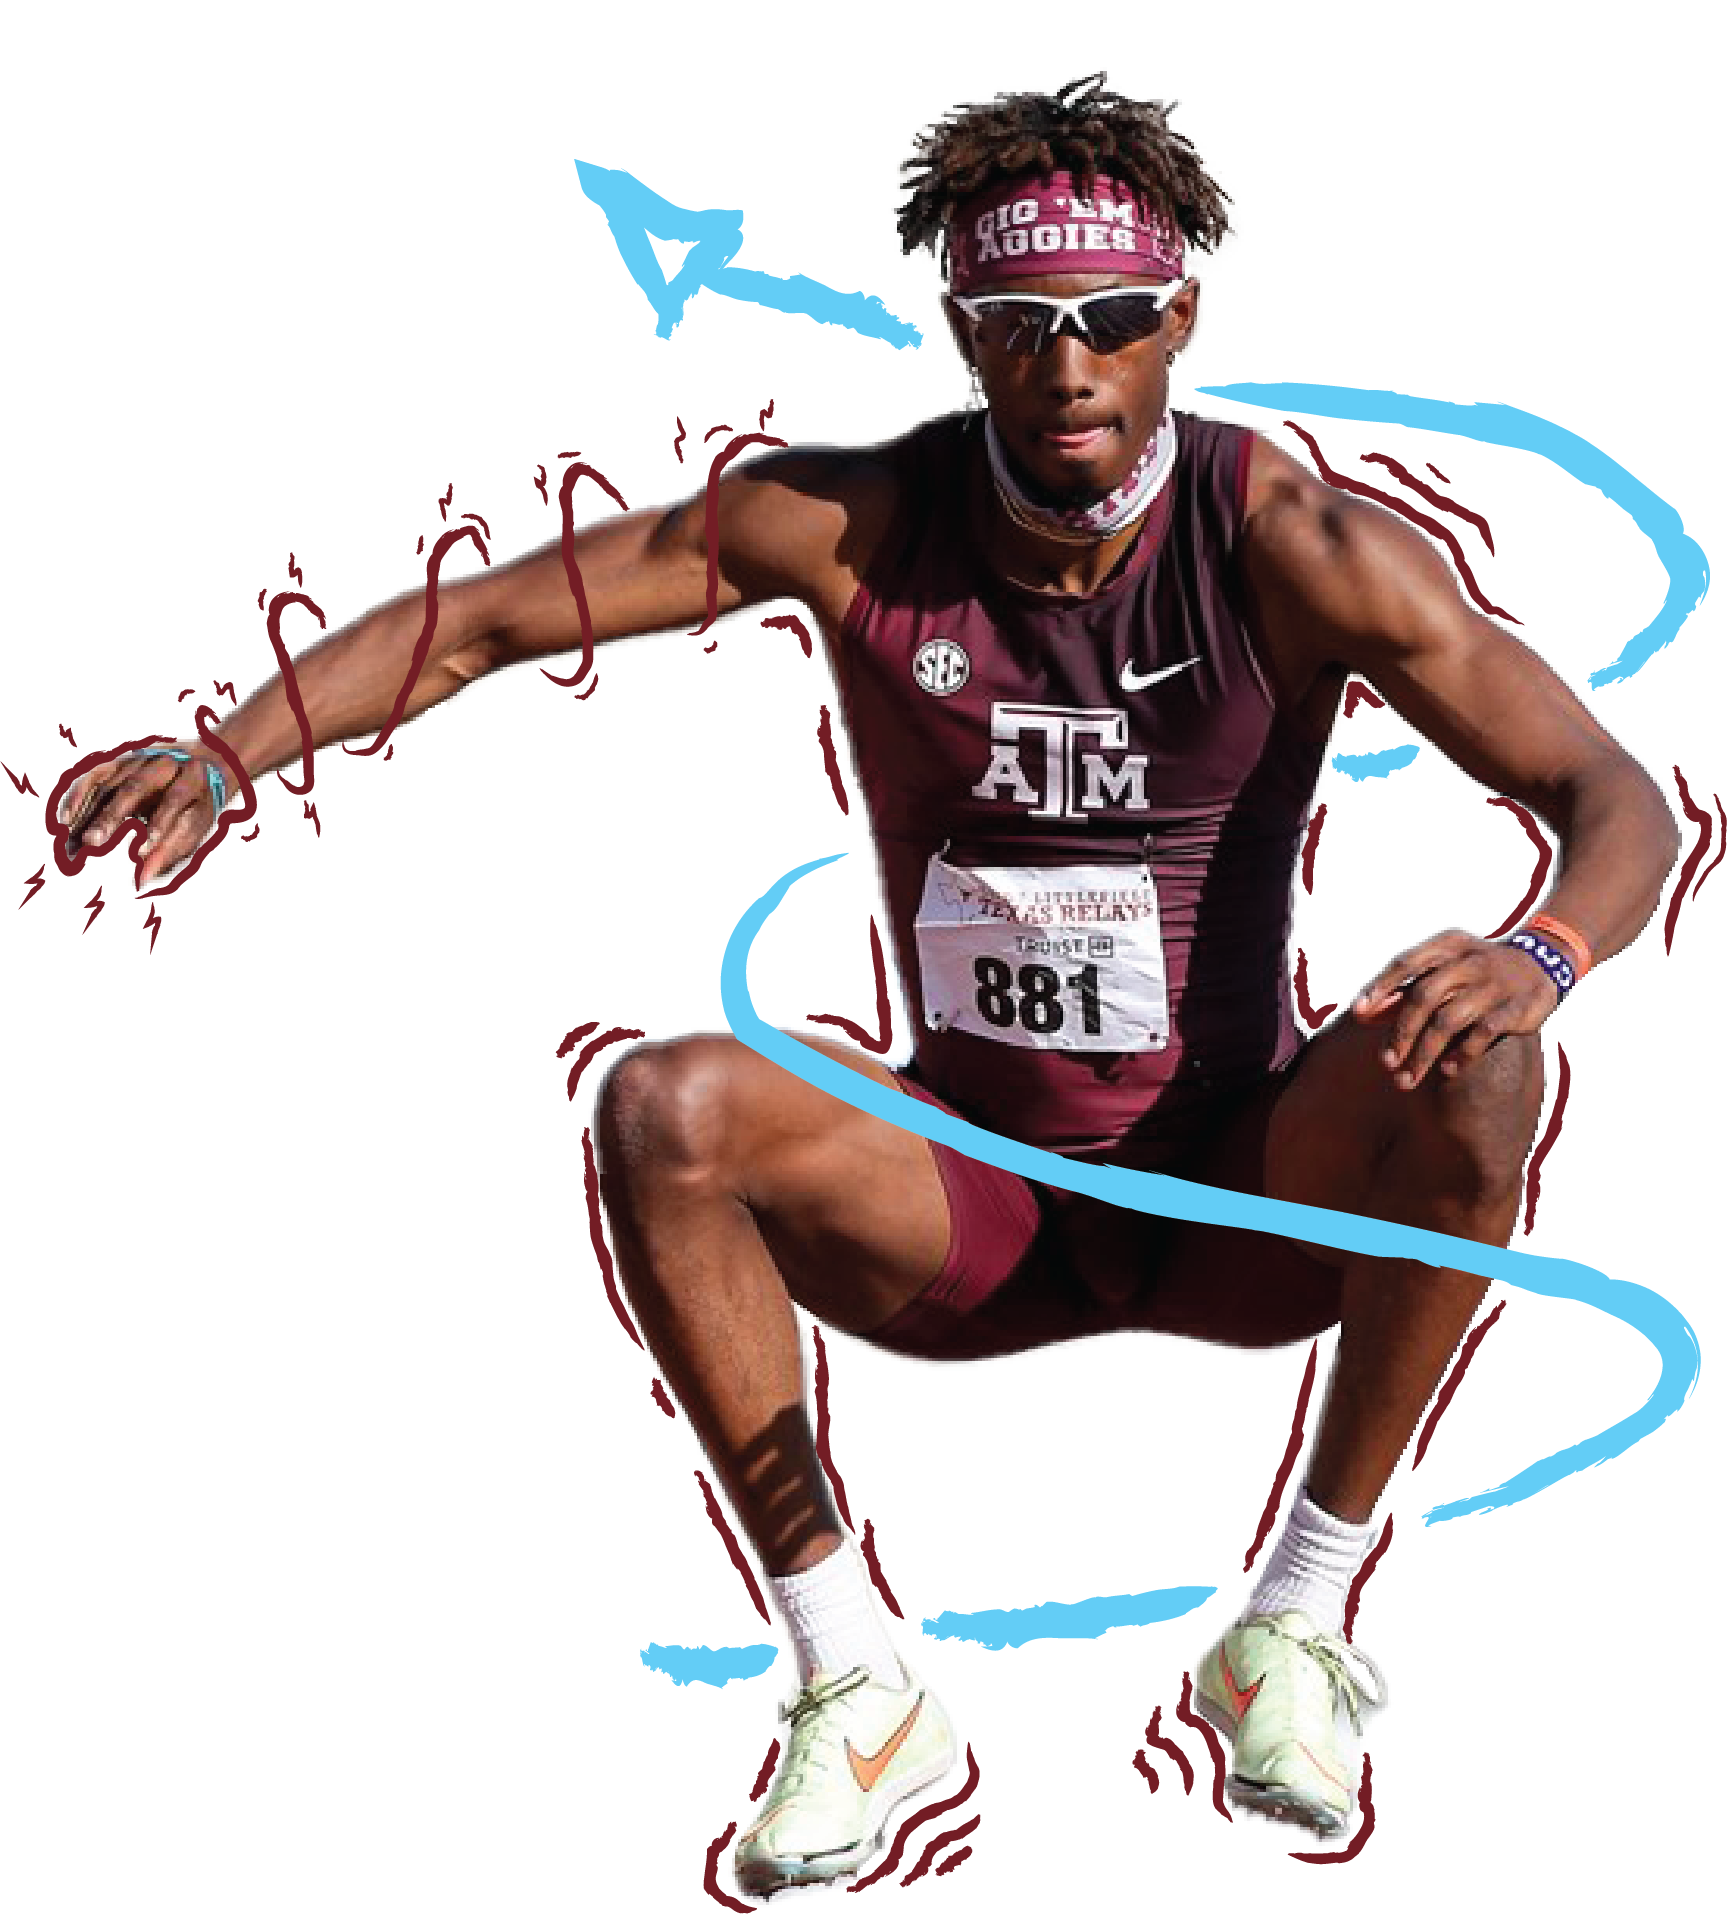 March 25, 2022 - James Smith during Day 1 of the Clyde Littlefield Texas Relays at Mike A. Myers Track and Soccer Stadium in Austin, Texas. Photo By Aiden Shertzer Texas A&M Athletics